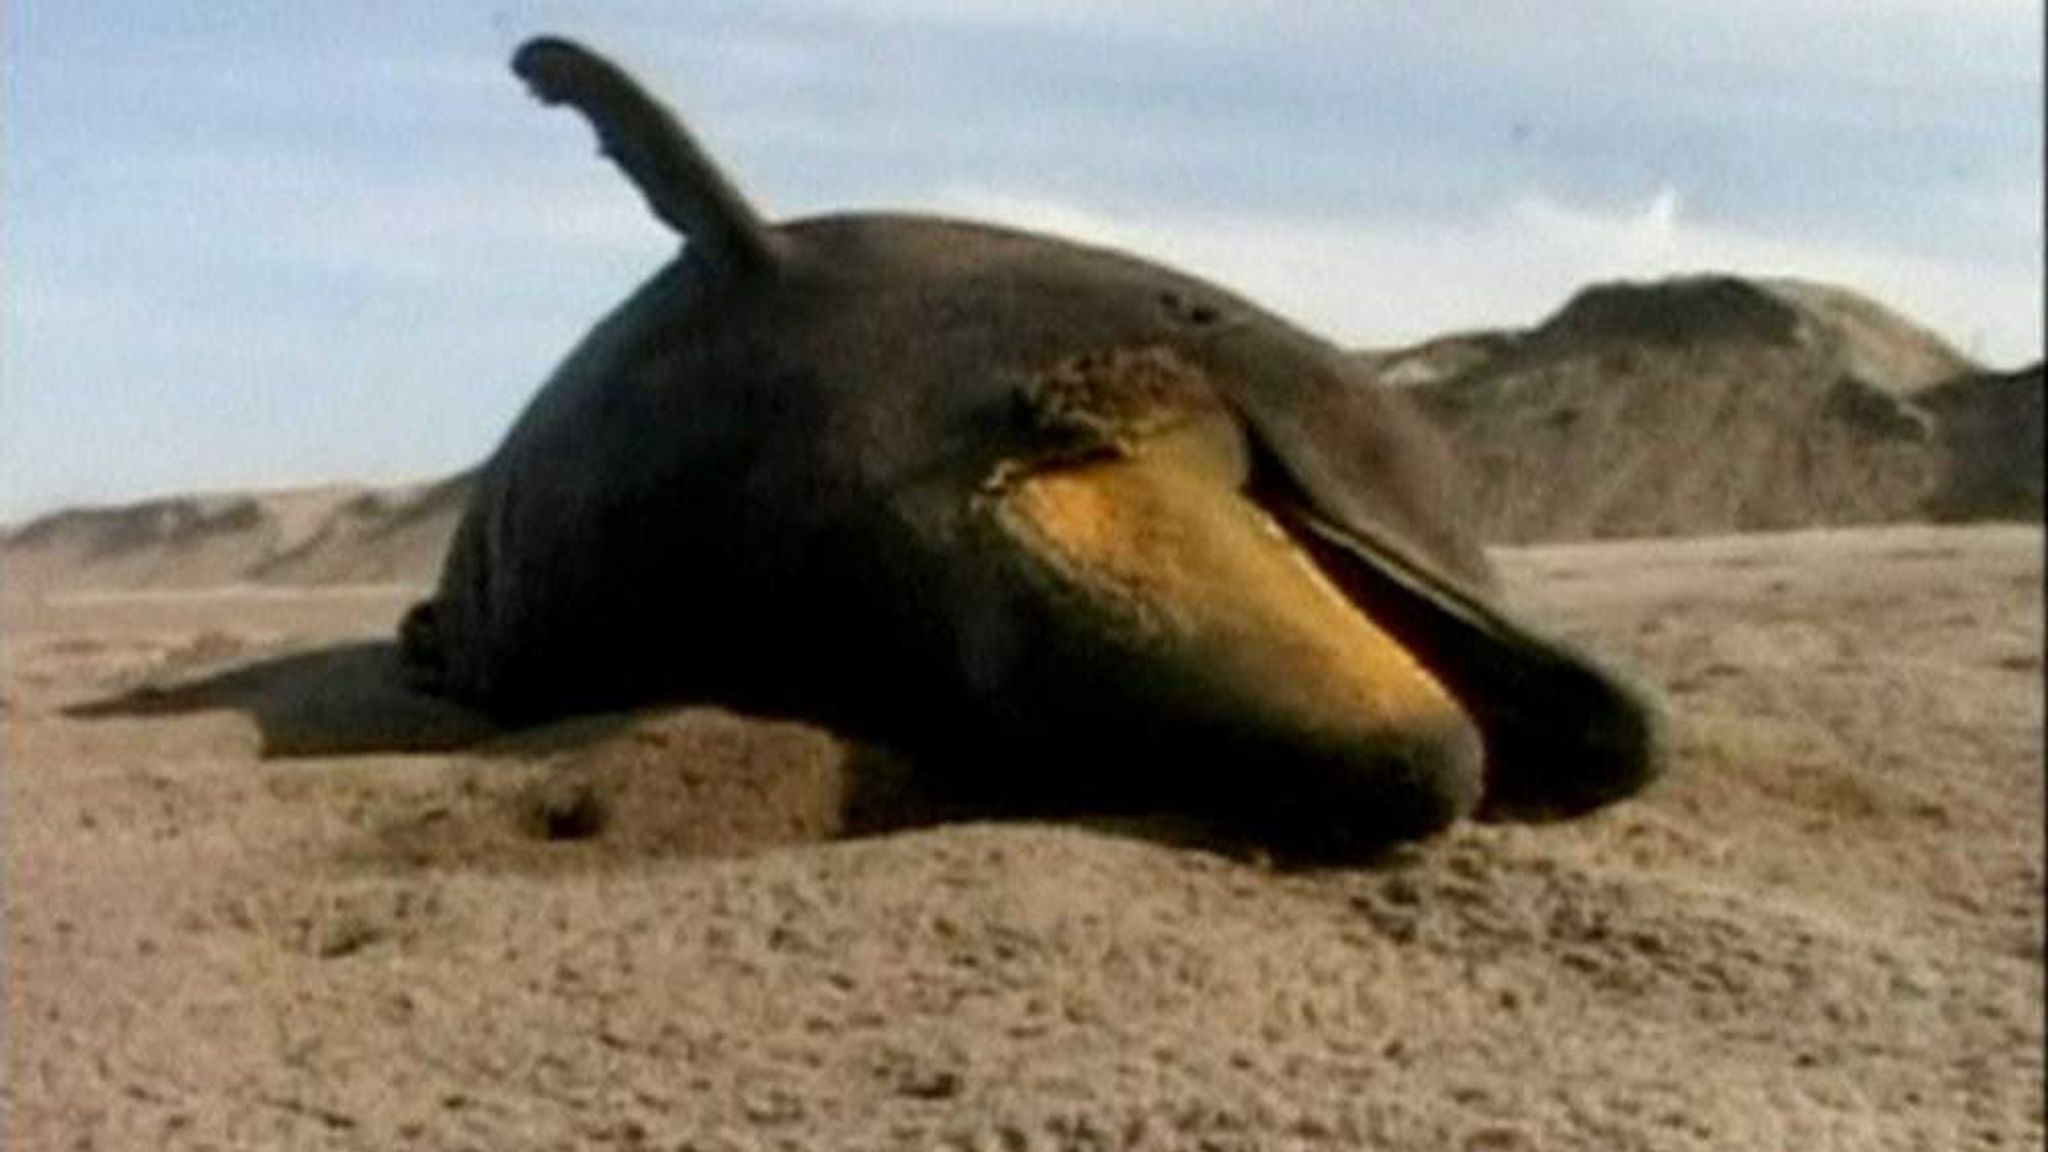 Peru: Dozens Of Dead Sea Creatures Washed Up | World News | Sky News